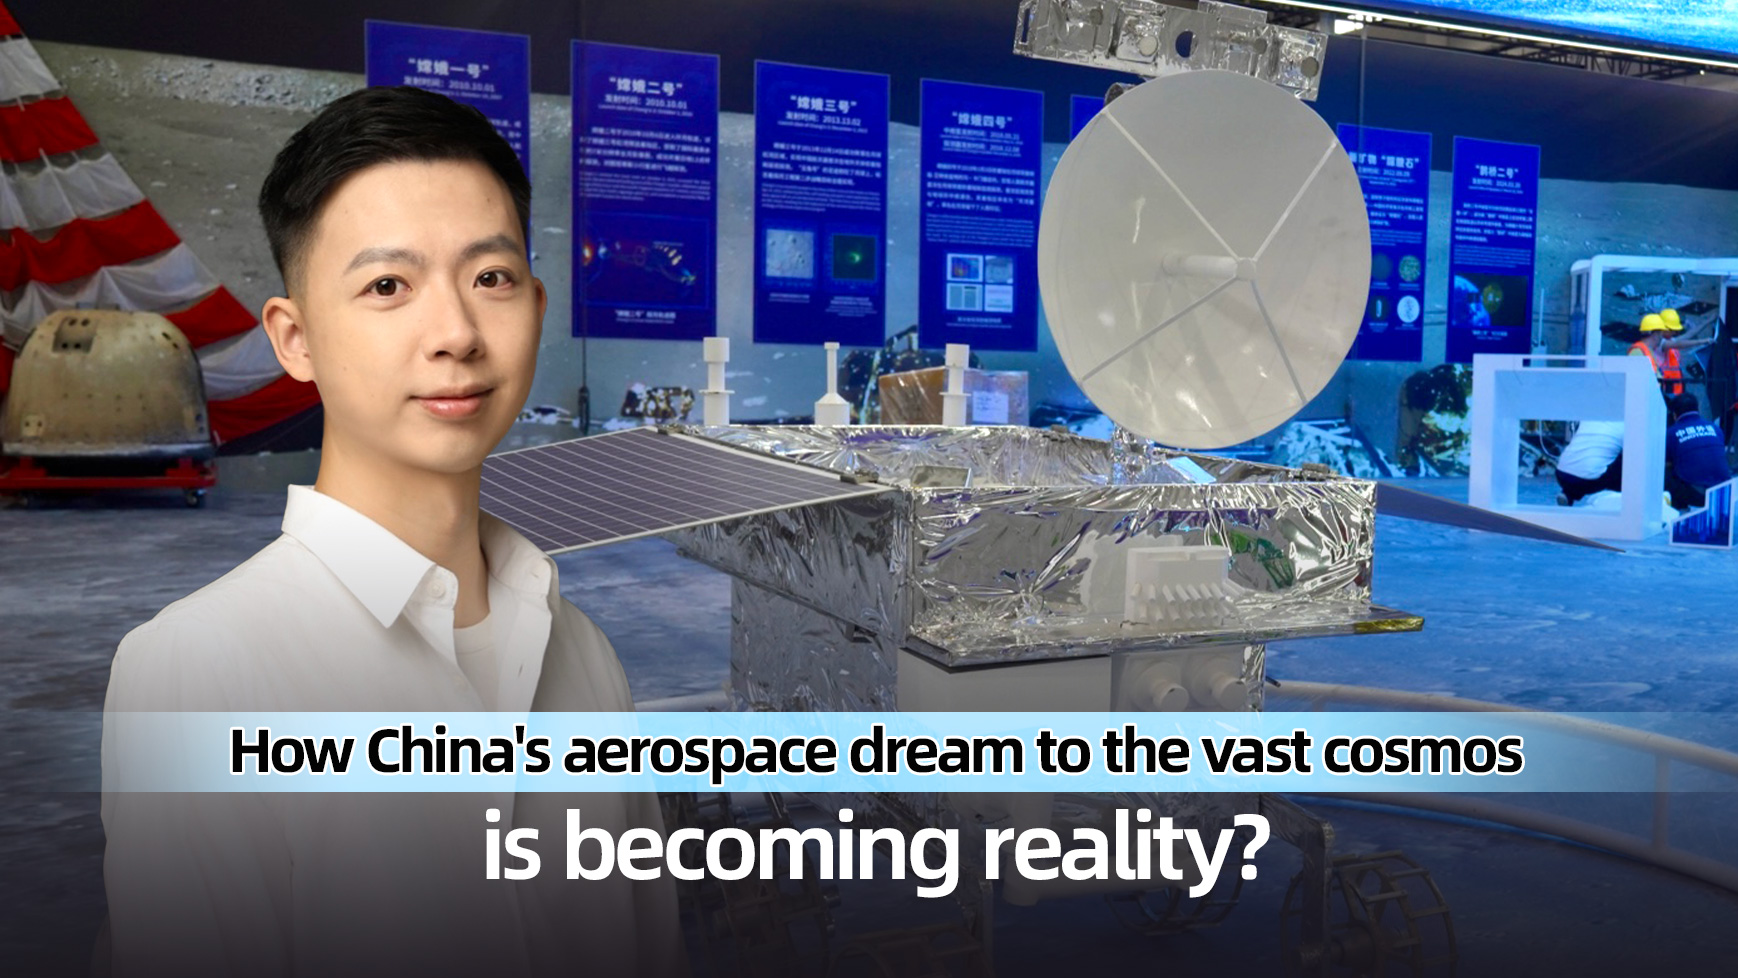 Live: How China's aerospace dream to the vast cosmos is becoming reality?